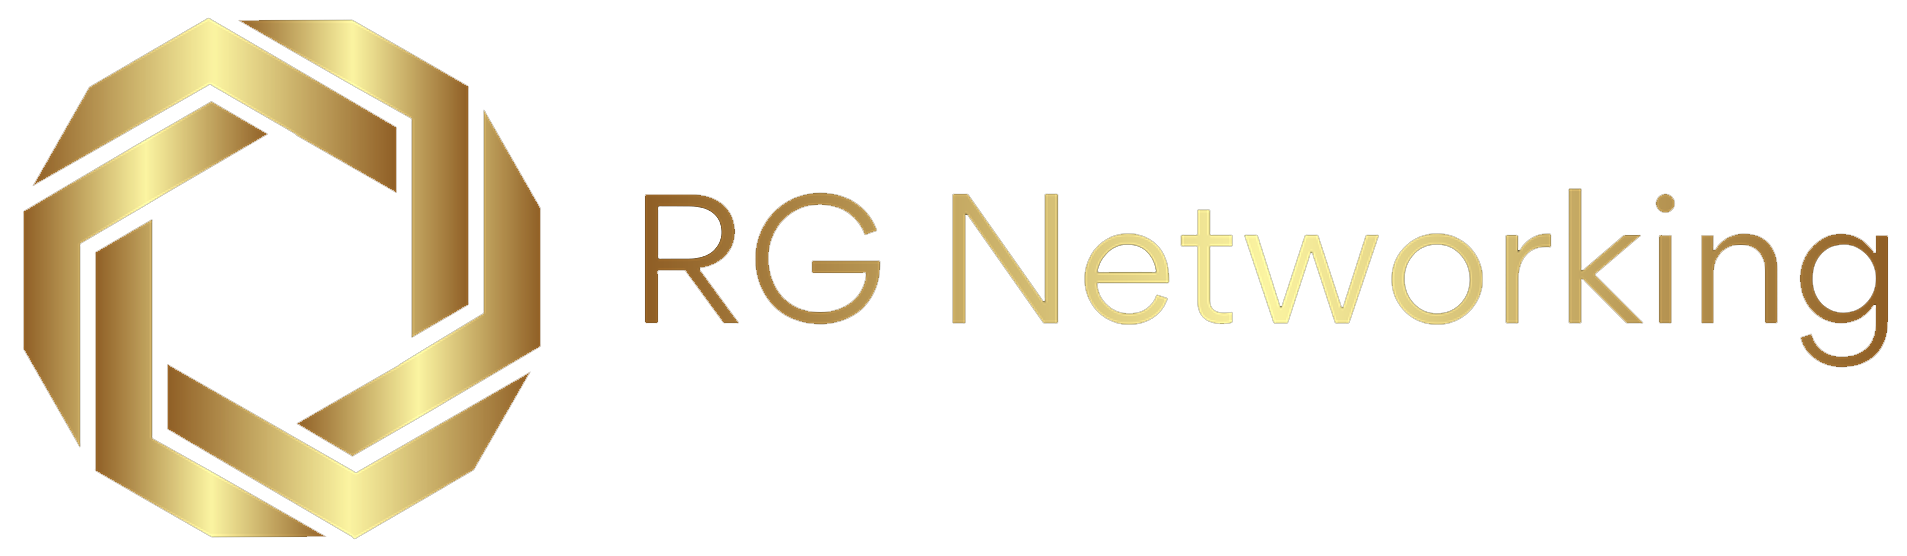 RG Networking